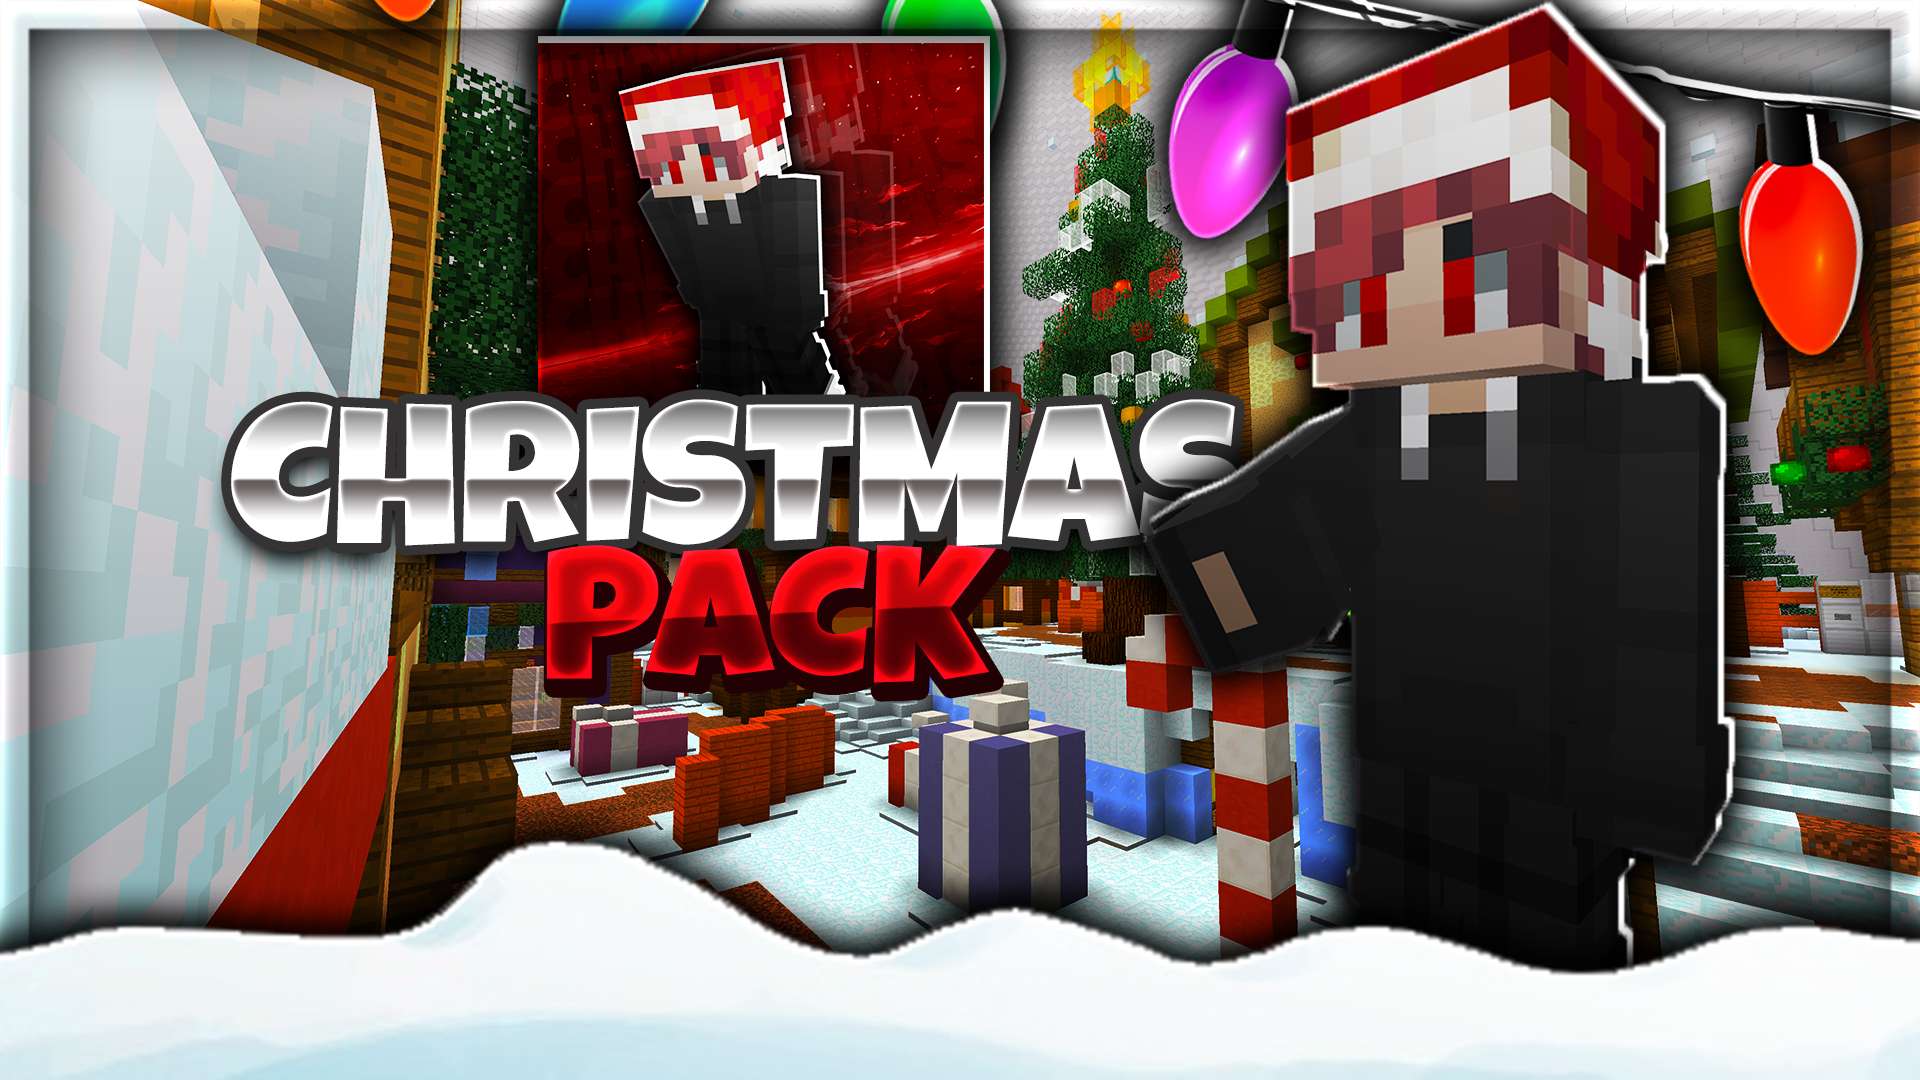 Christmas Pack 16x 16 by BladezzPack on PvPRP